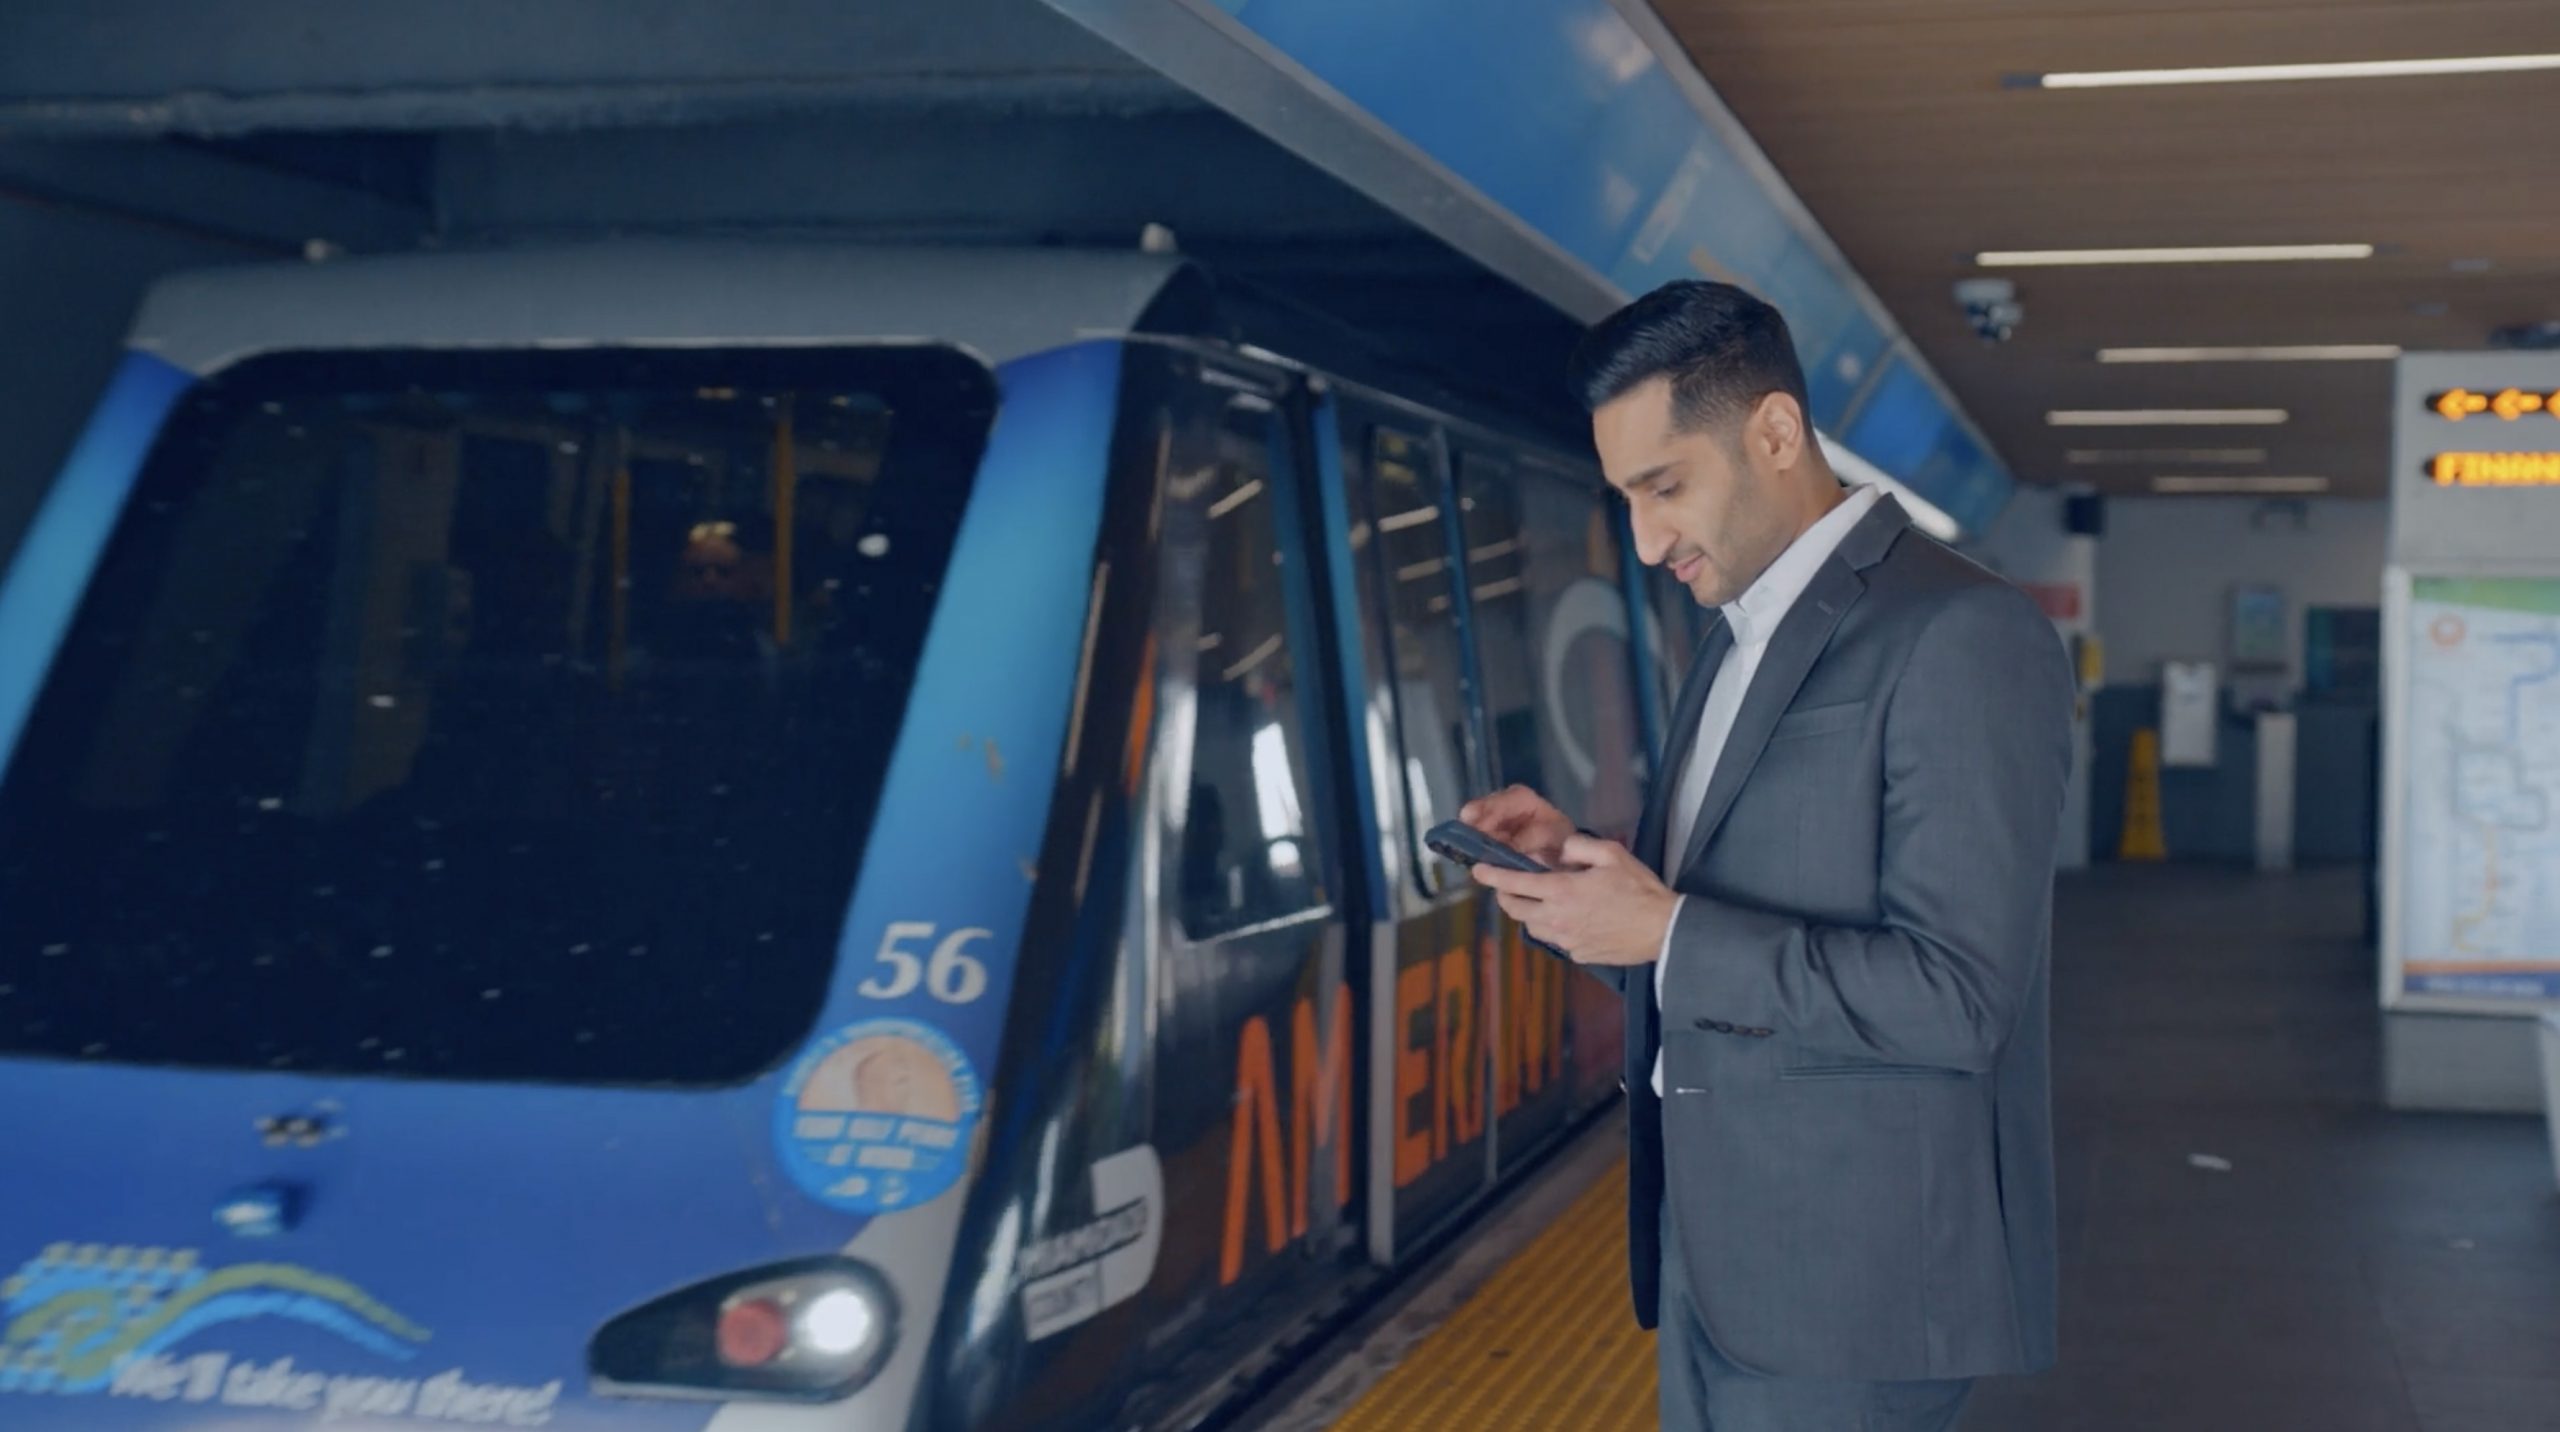 IU Man in Miami waiting for the public transit tram using iPhone with AT&T 5G network